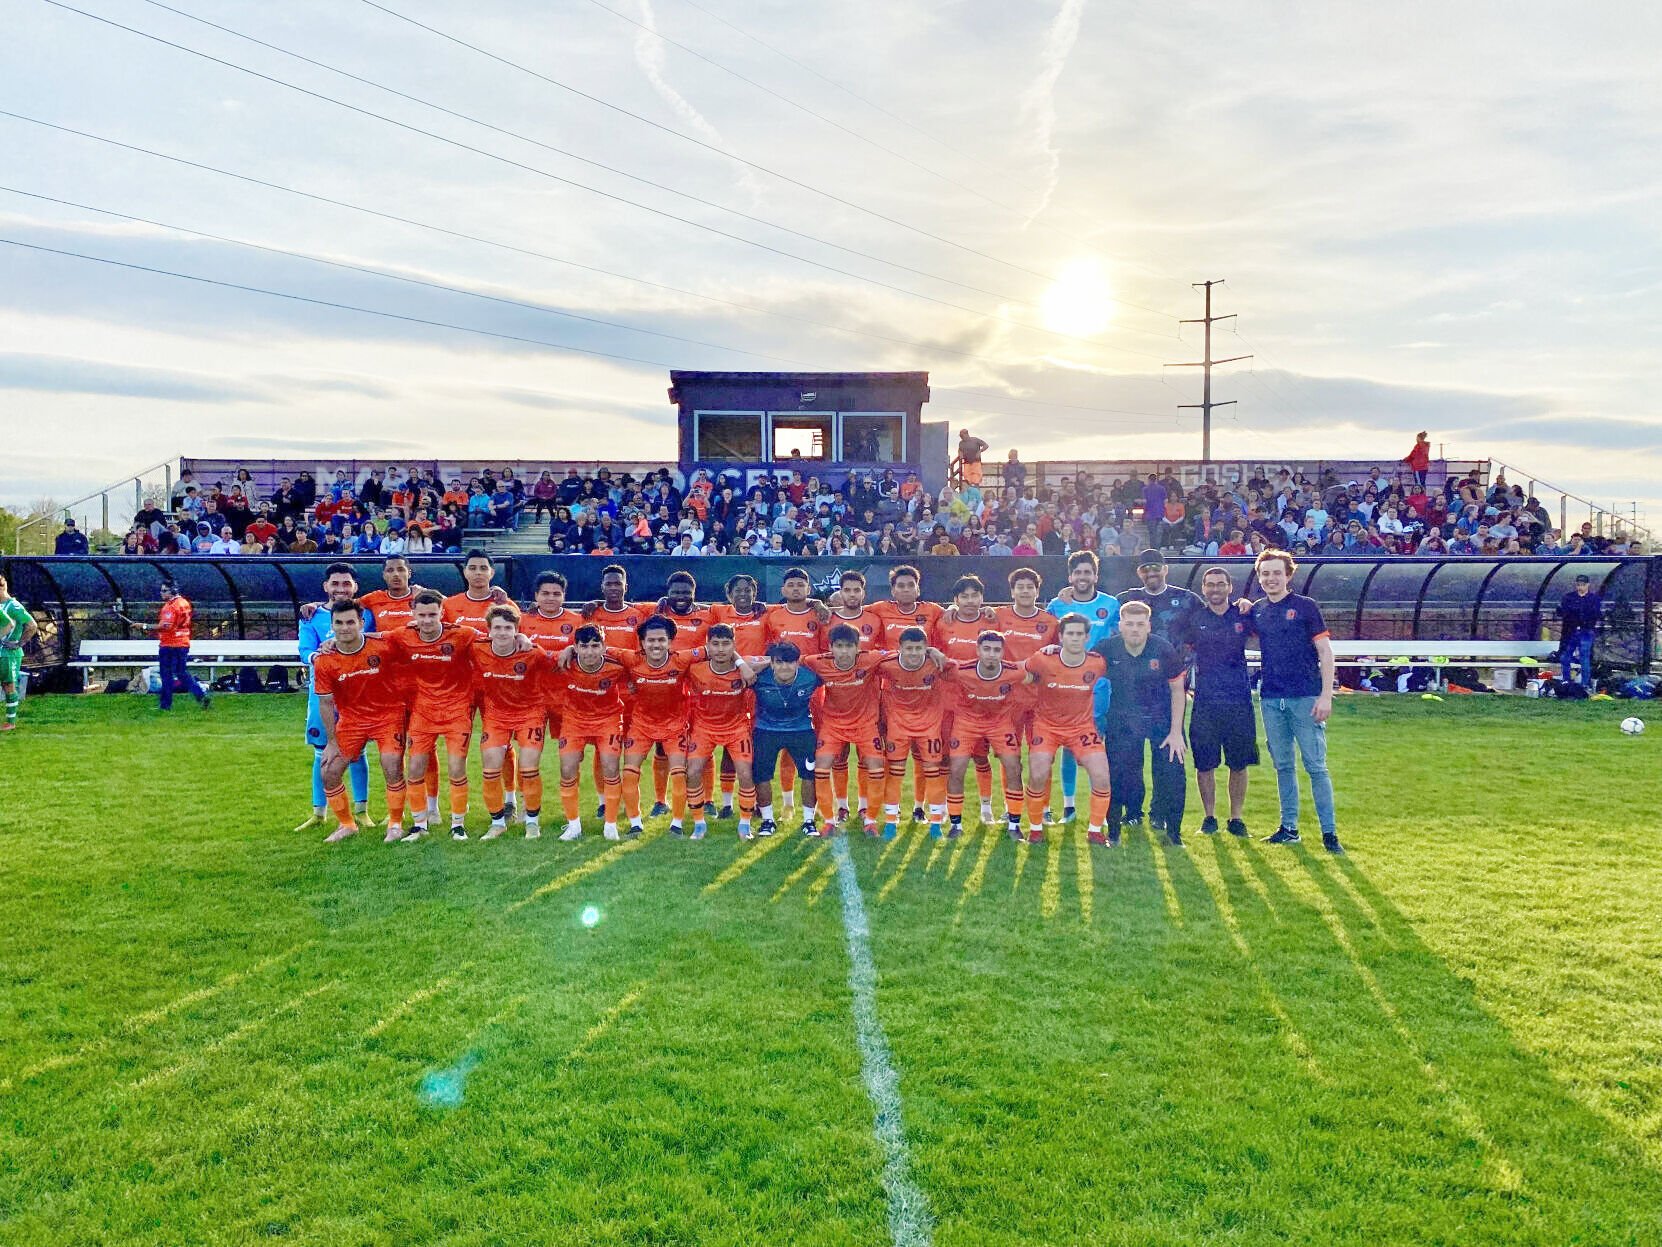 Exciting Season Ahead: Goshen City FC Ready to Kick Off Second Season against Chicago Fire FC